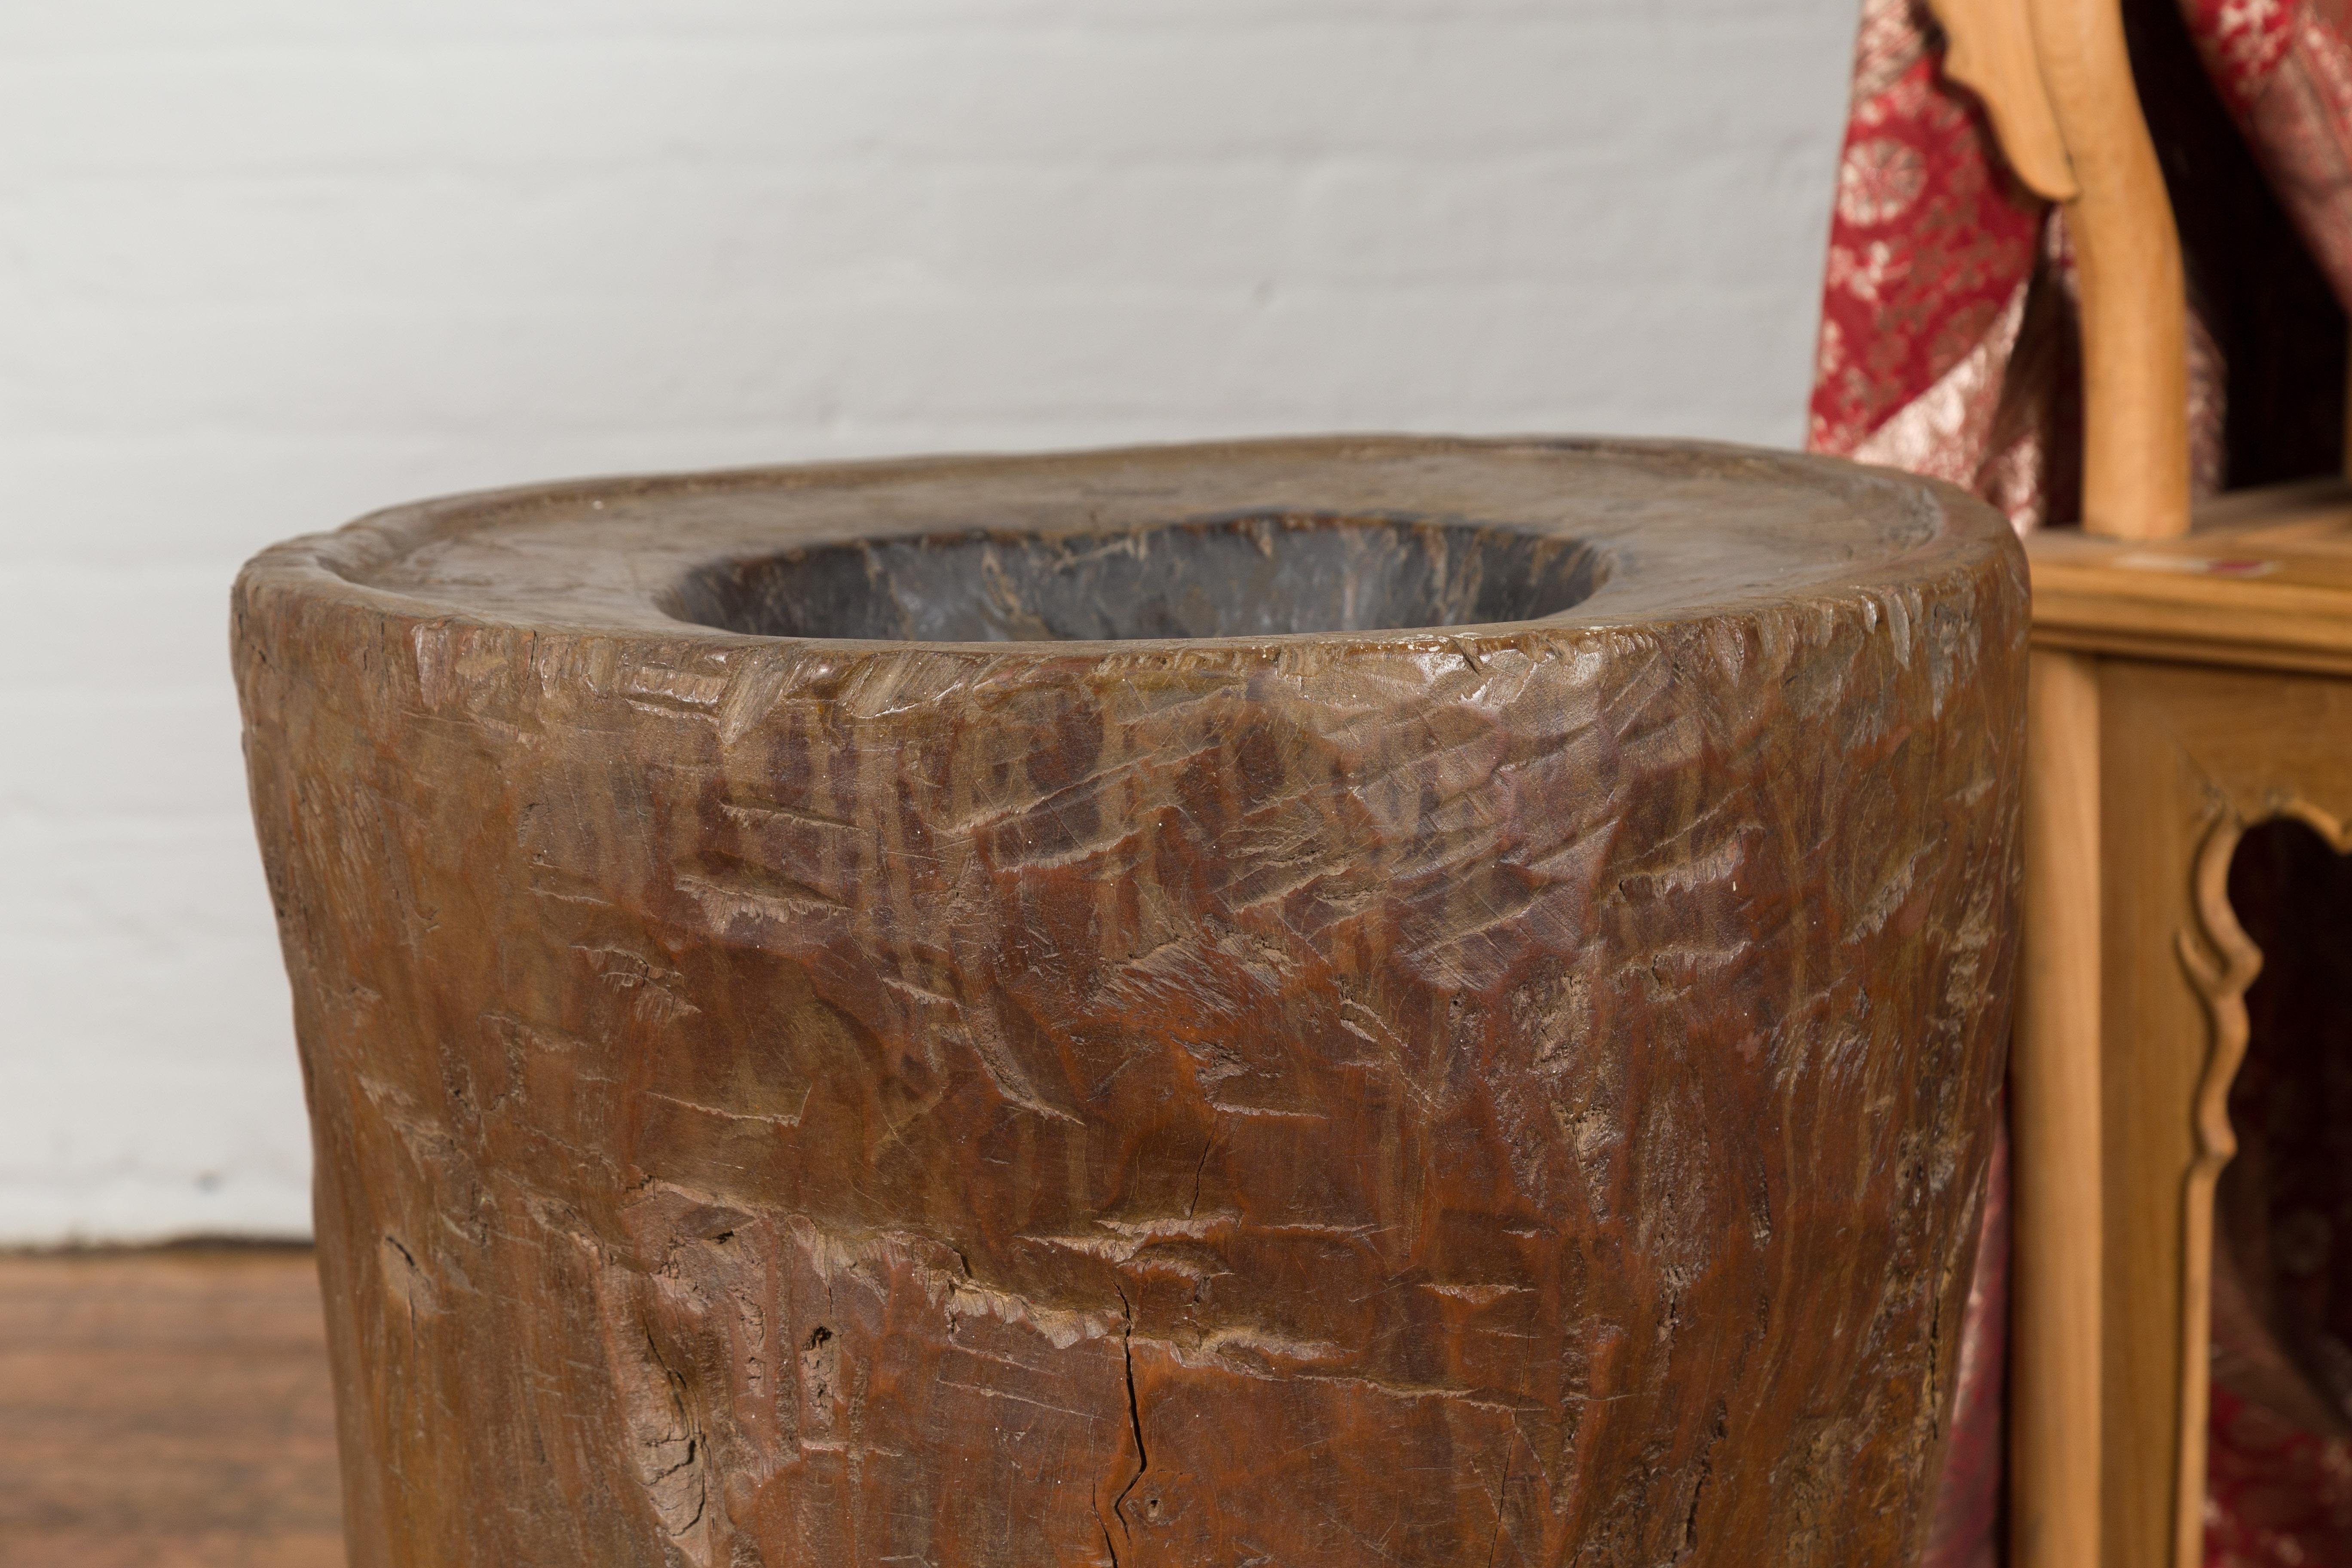 Antique Indonesian Rustic Tree Stump Planter with Weathered Appearance In Good Condition For Sale In Yonkers, NY